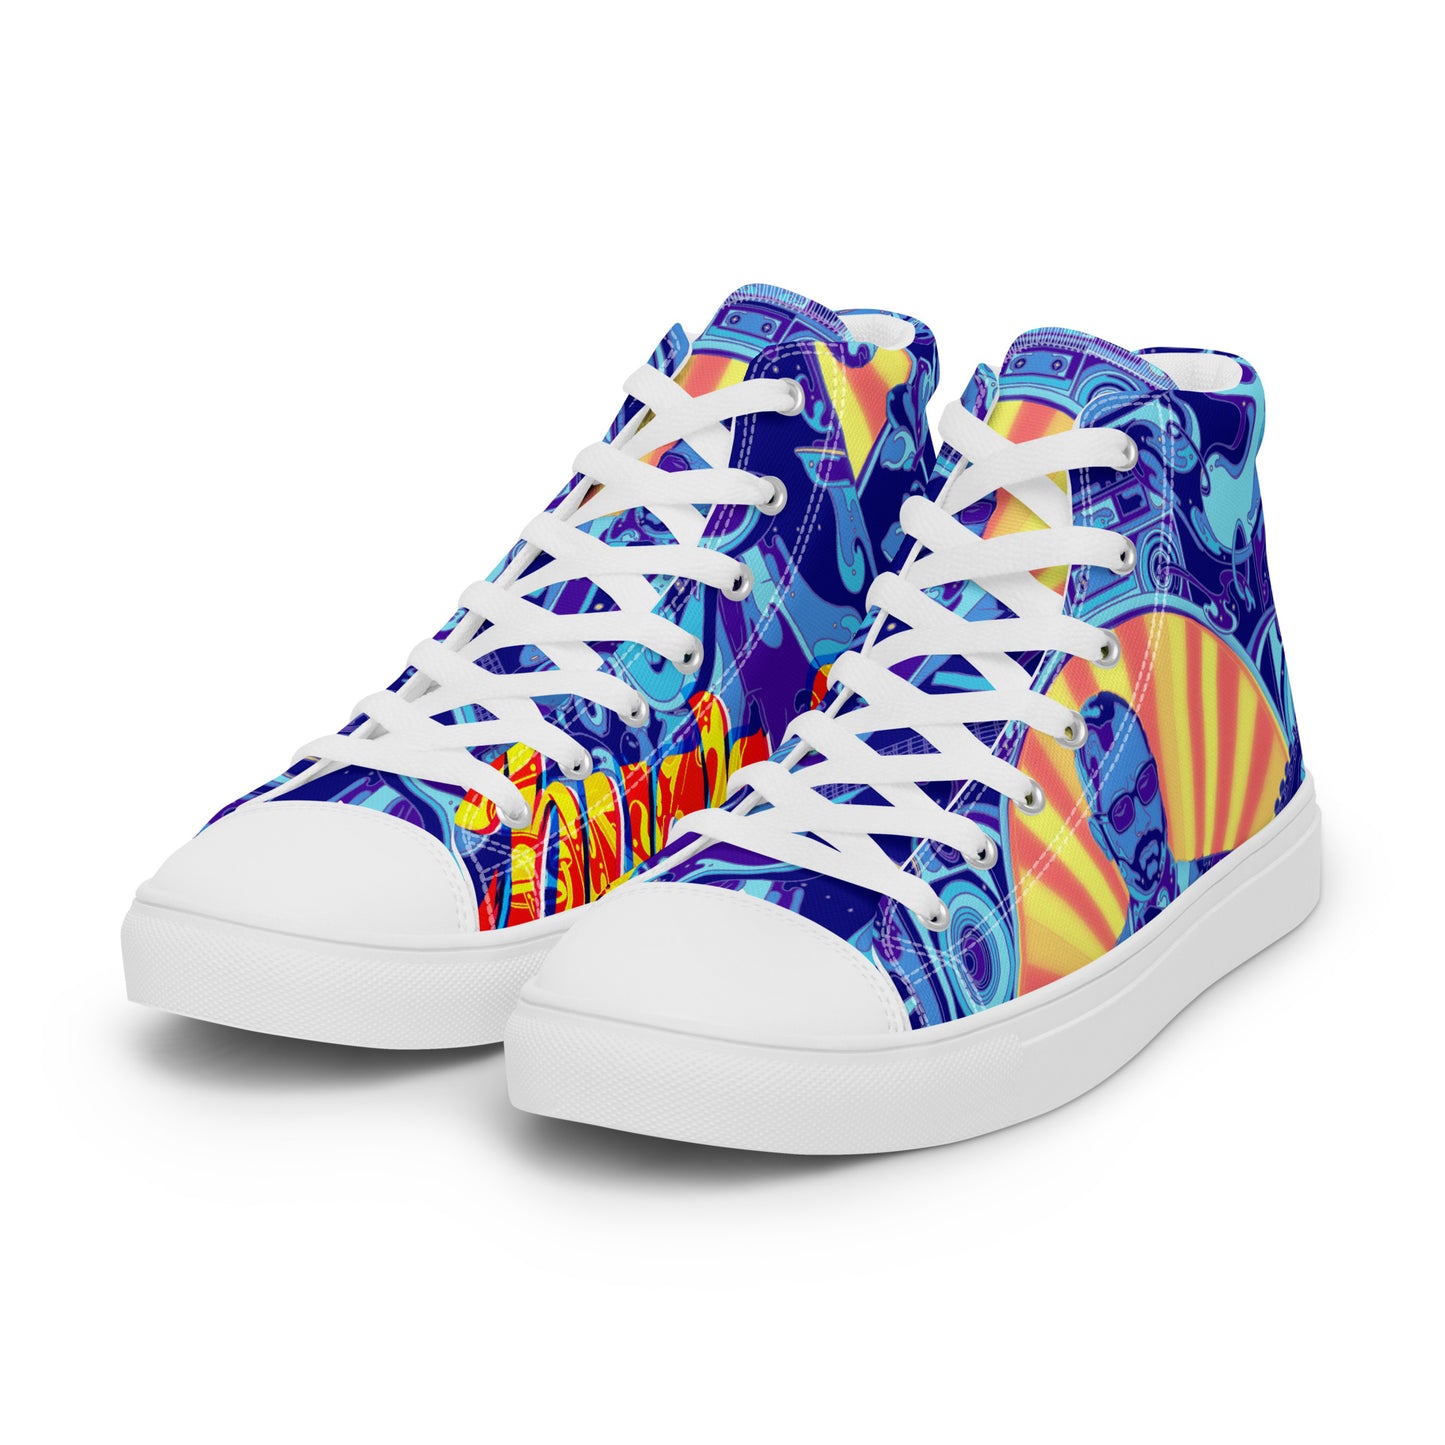 EntheoCosm Shoes - Yellow Sun Inspired High Top Canvas womens shoes